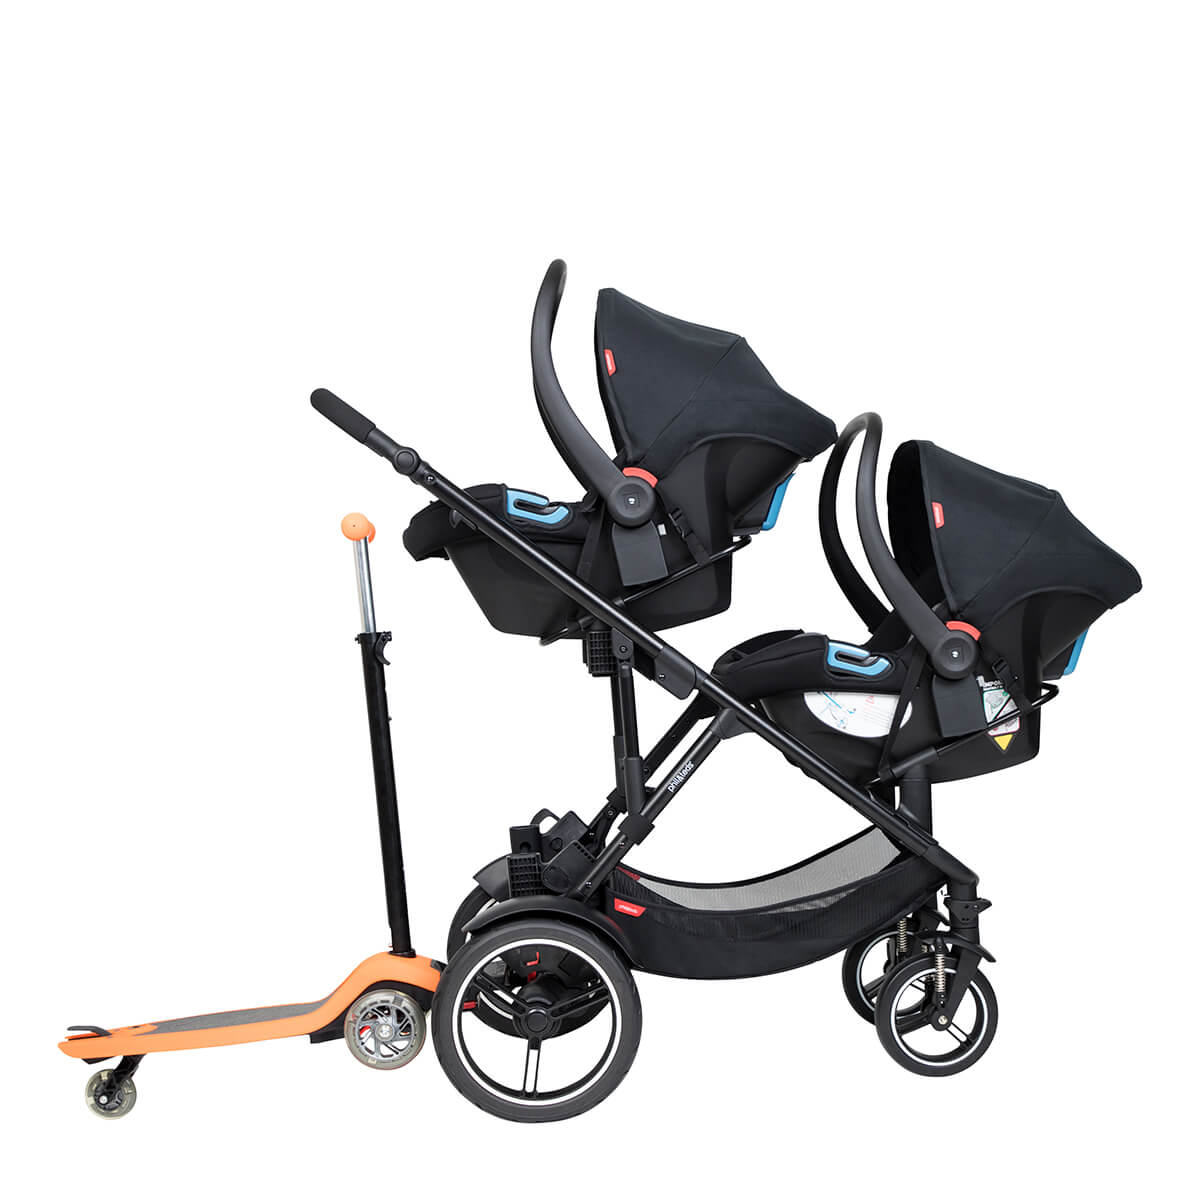 https://cdn.accentuate.io/7888304210090/19794908643498/philteds-voyager-buggy-with-double-travel-systems-and-freerider-stroller-board-in-the-rear-v1700692213654.jpg?1200x1200